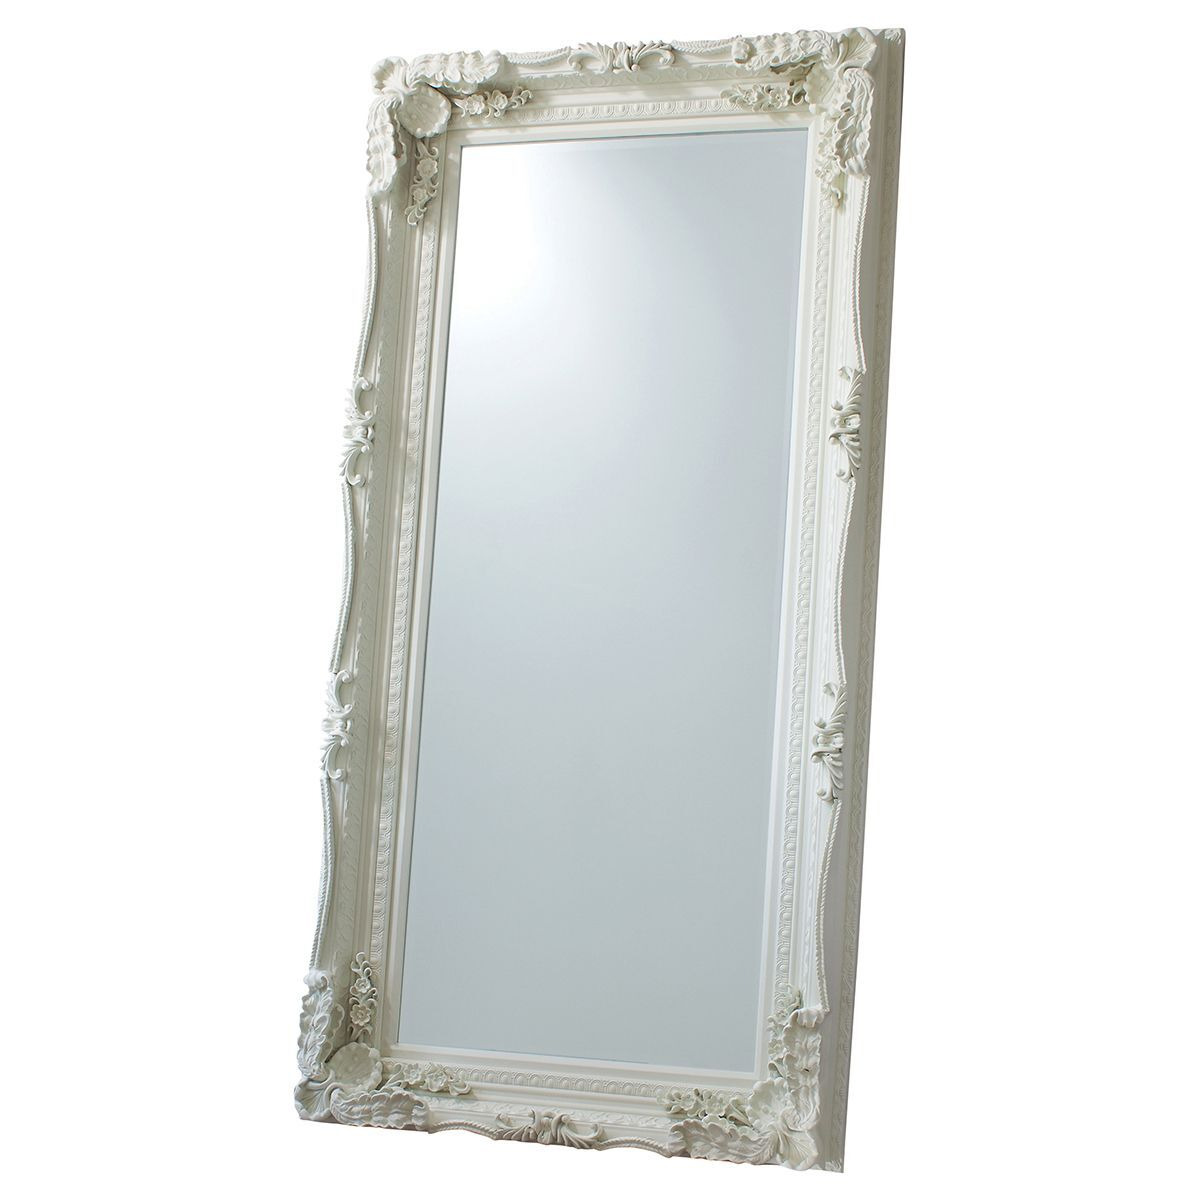 Gallery Interiors Carved Louis Leaner Mirror in Cream - image 1